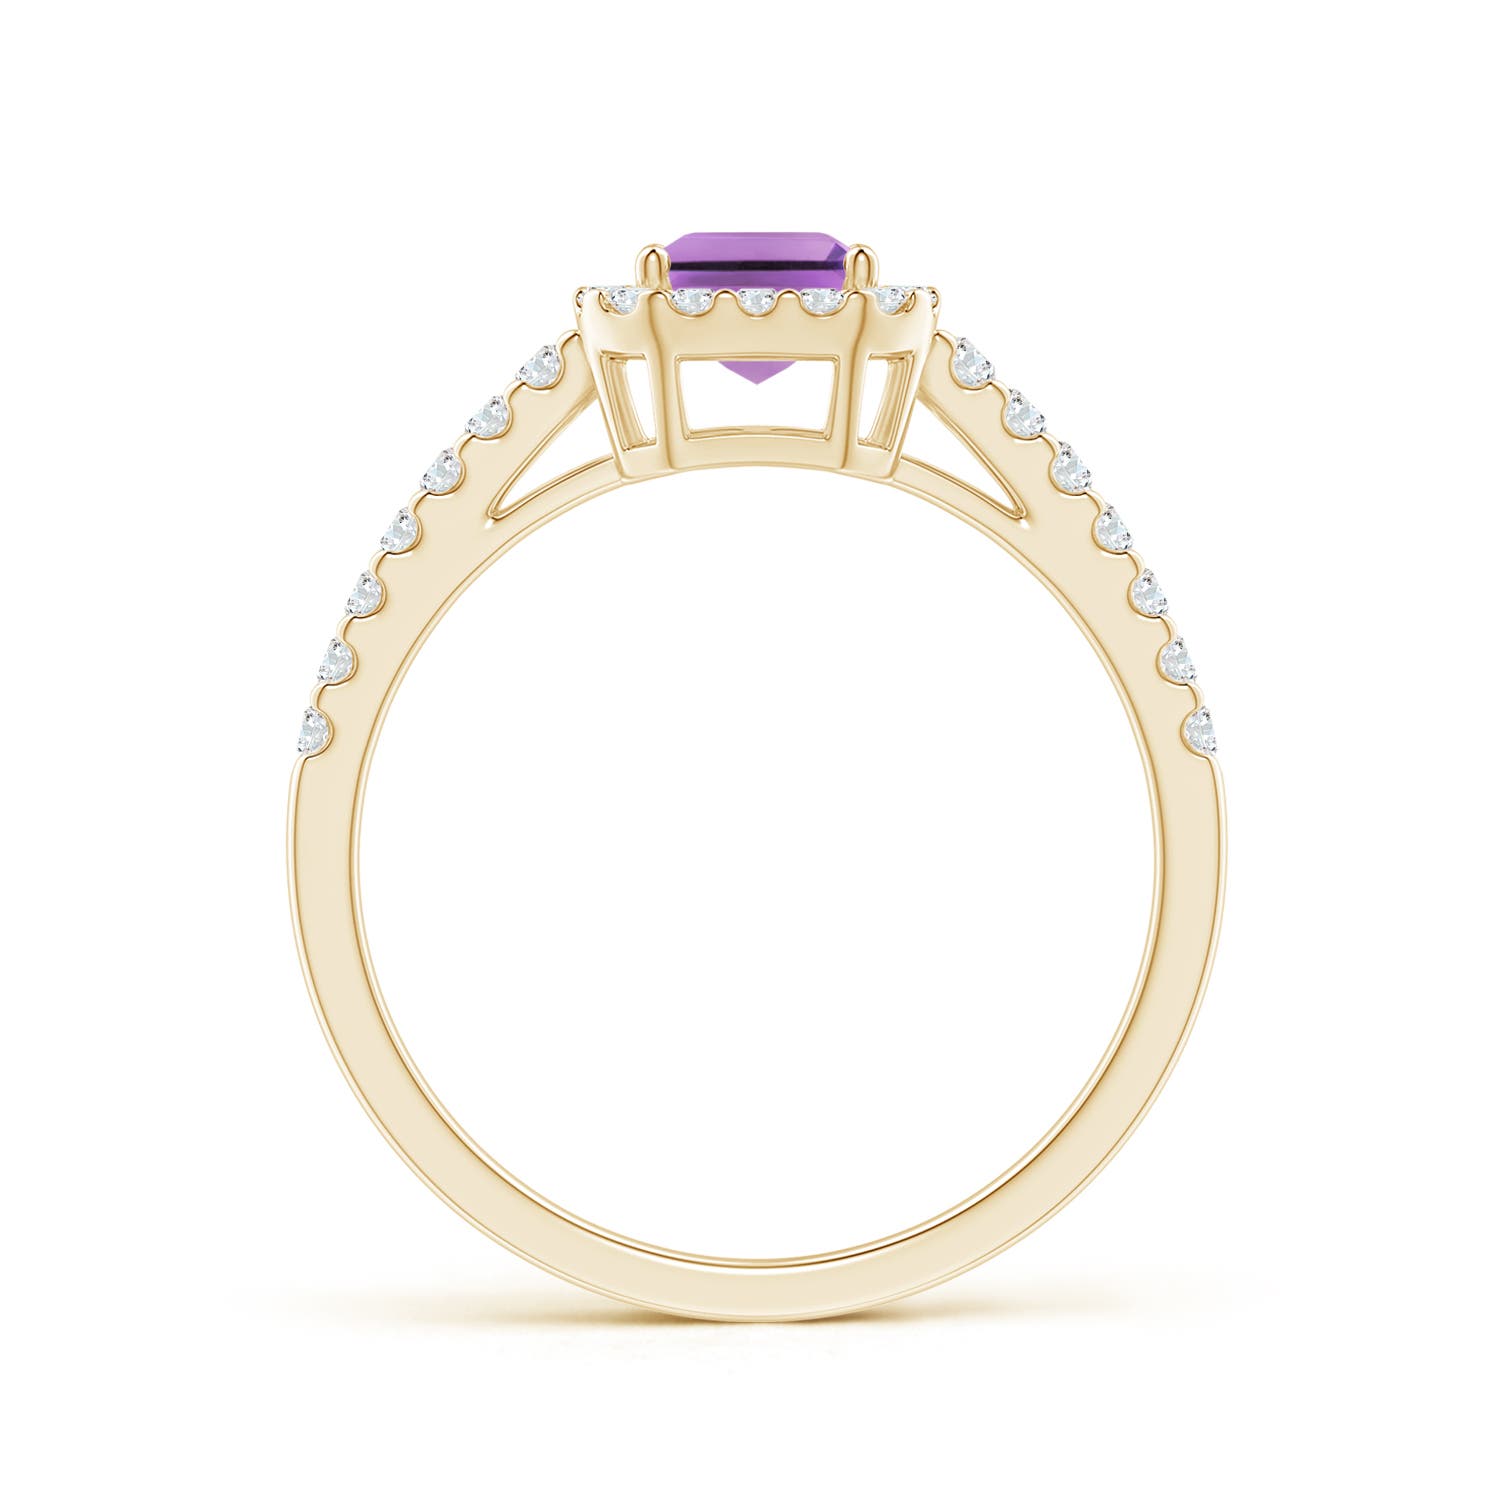 A - Amethyst / 1.23 CT / 14 KT Yellow Gold